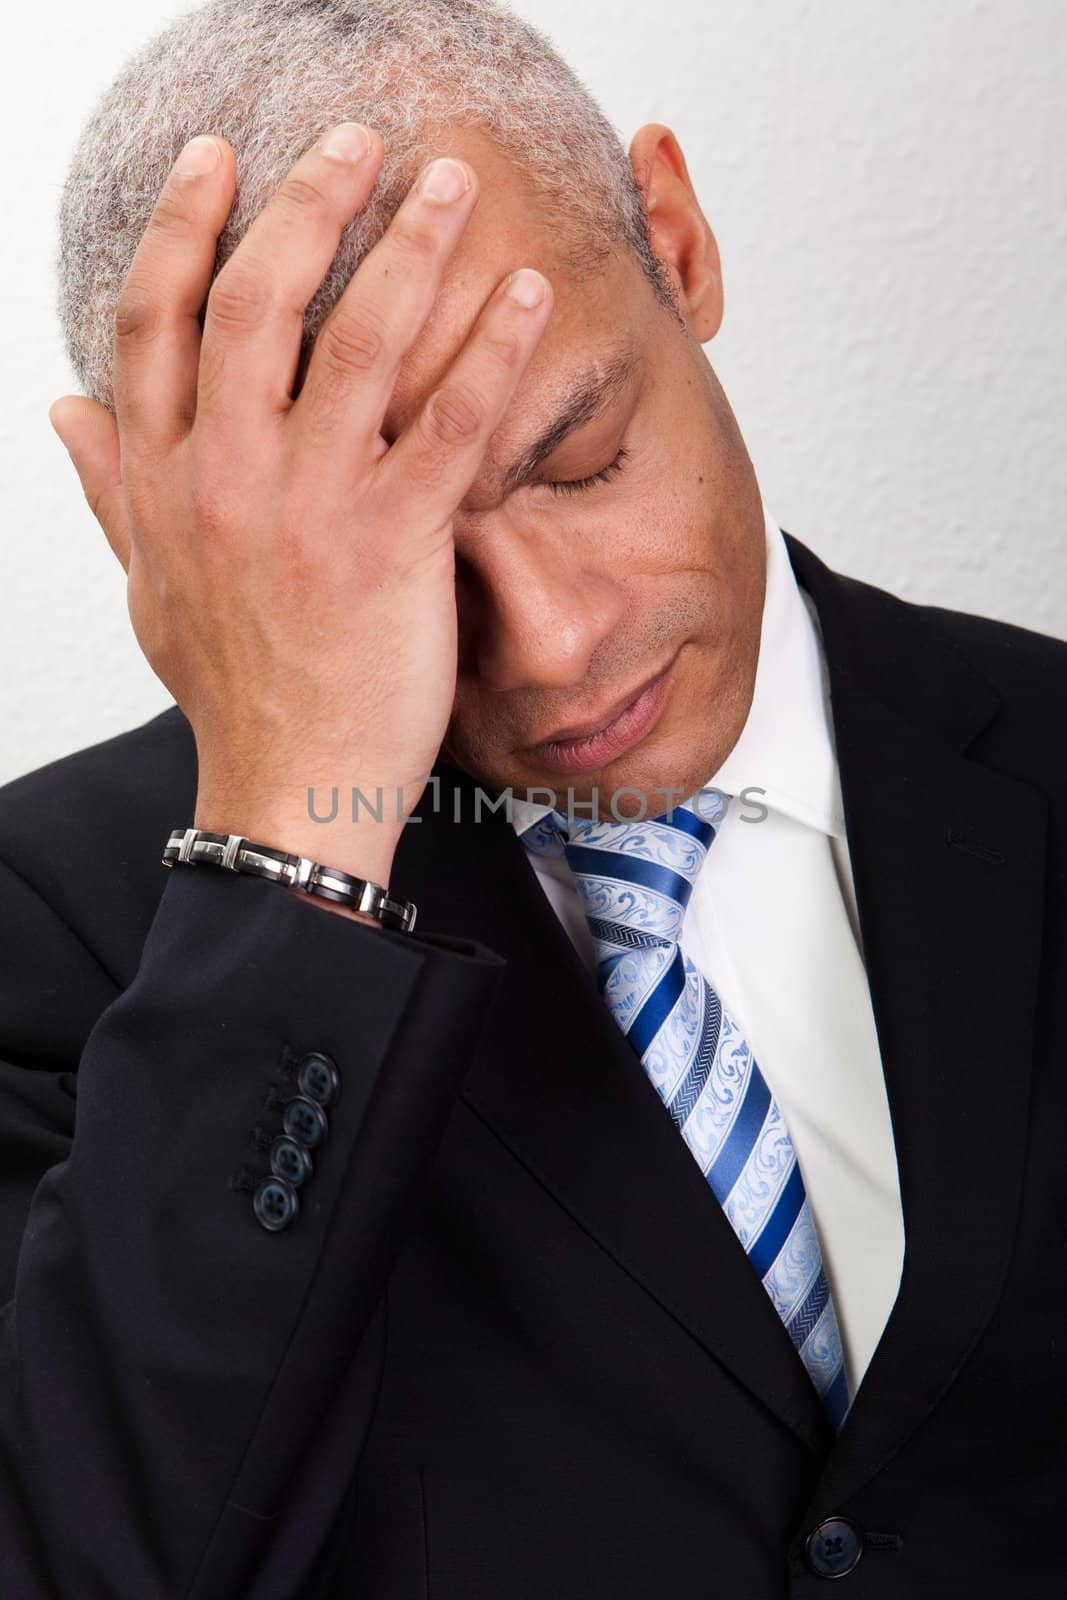 Stressed Businessman Man With Headache and holding his head